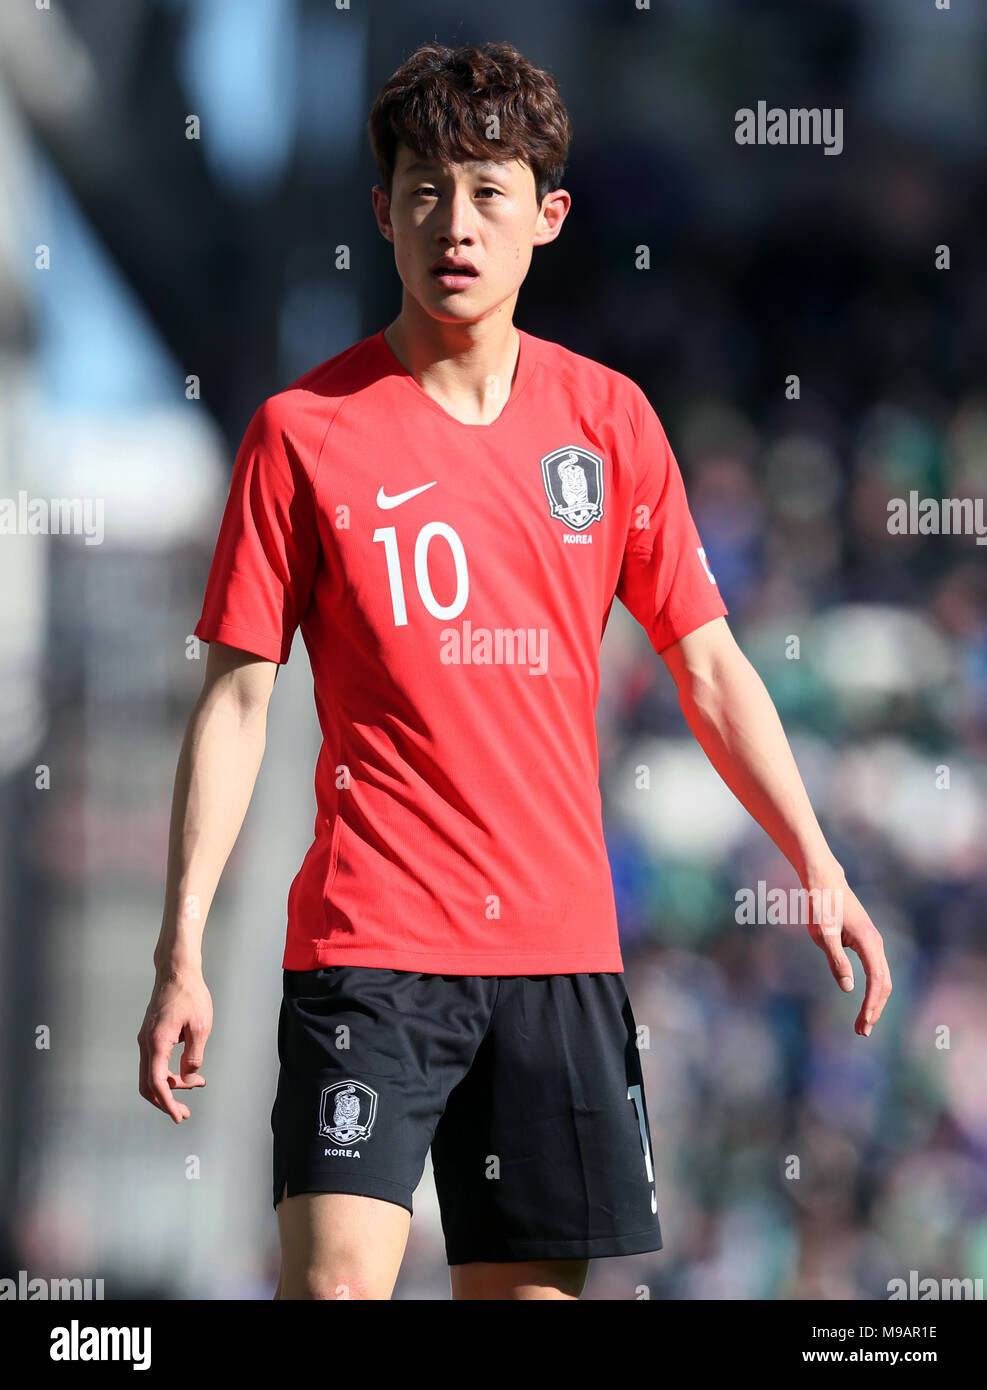 South Korea's Jae-Sung Lee during the international friendly match at  Windsor Park, Belfast. PRESS ASSOCIATION Photo. Picture date: Saturday  March 24, 2018. See PA story SOCCER N Ireland. Photo credit should read: